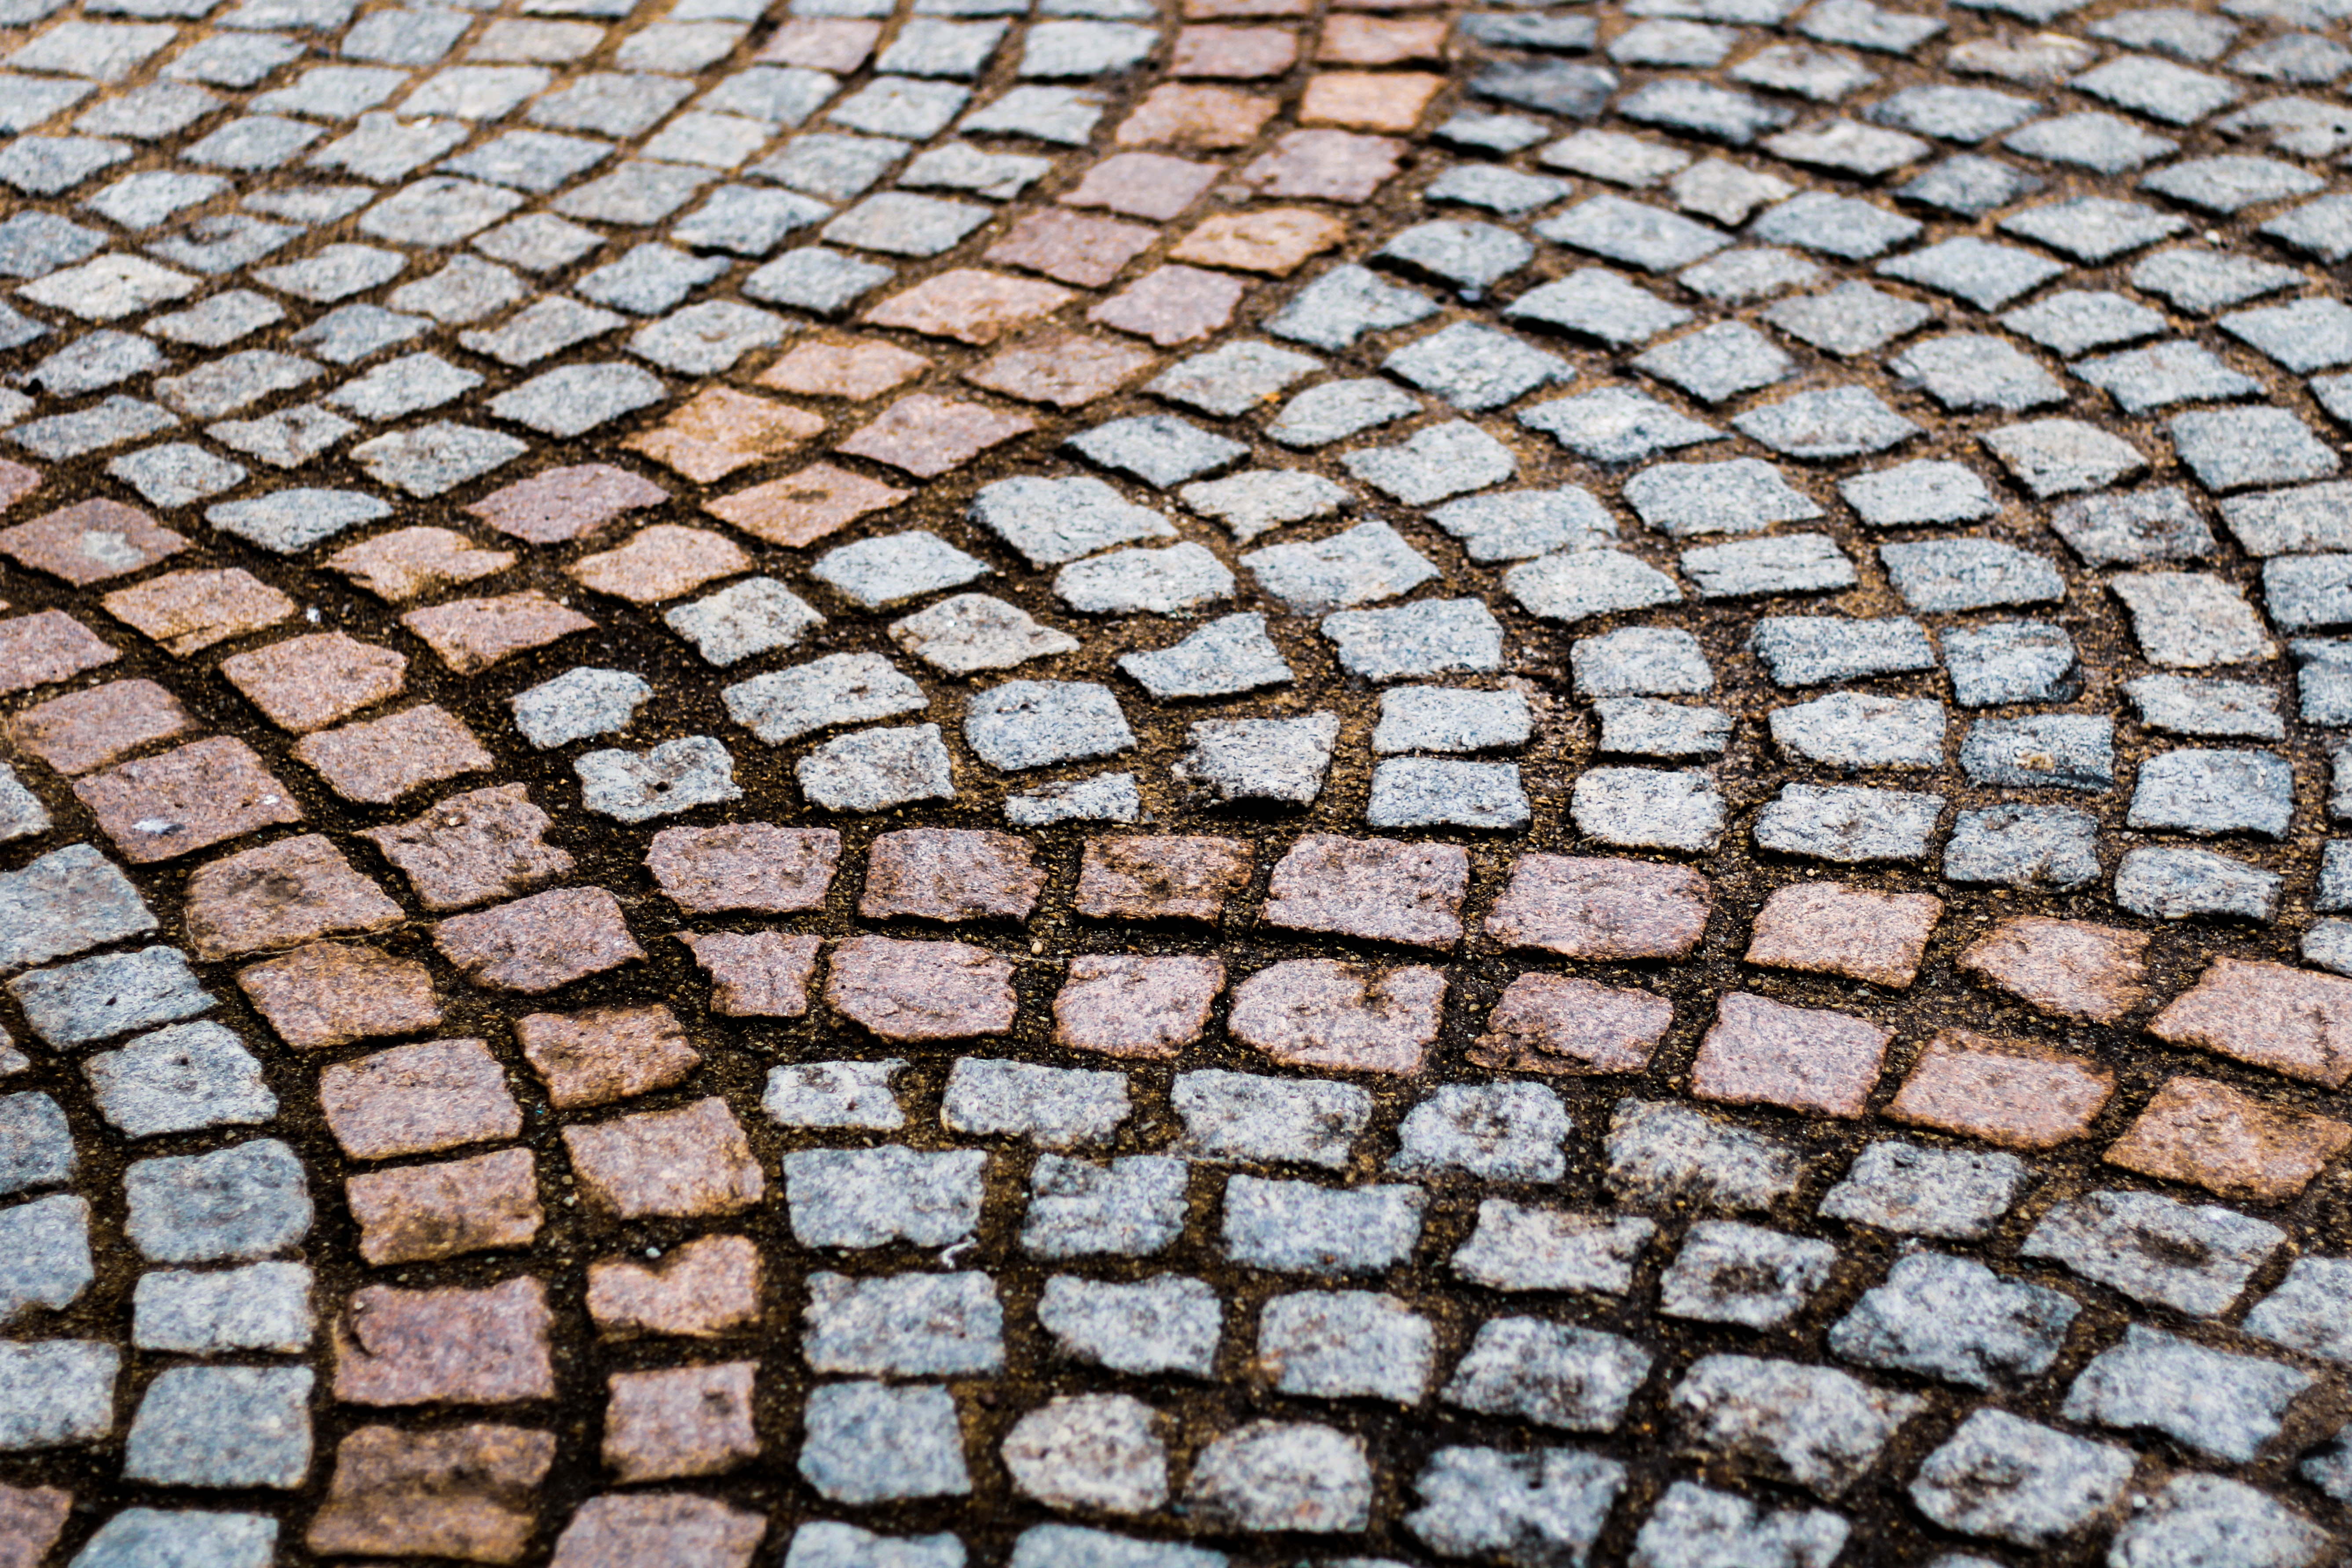 Brick paving in a curving, round pattern.